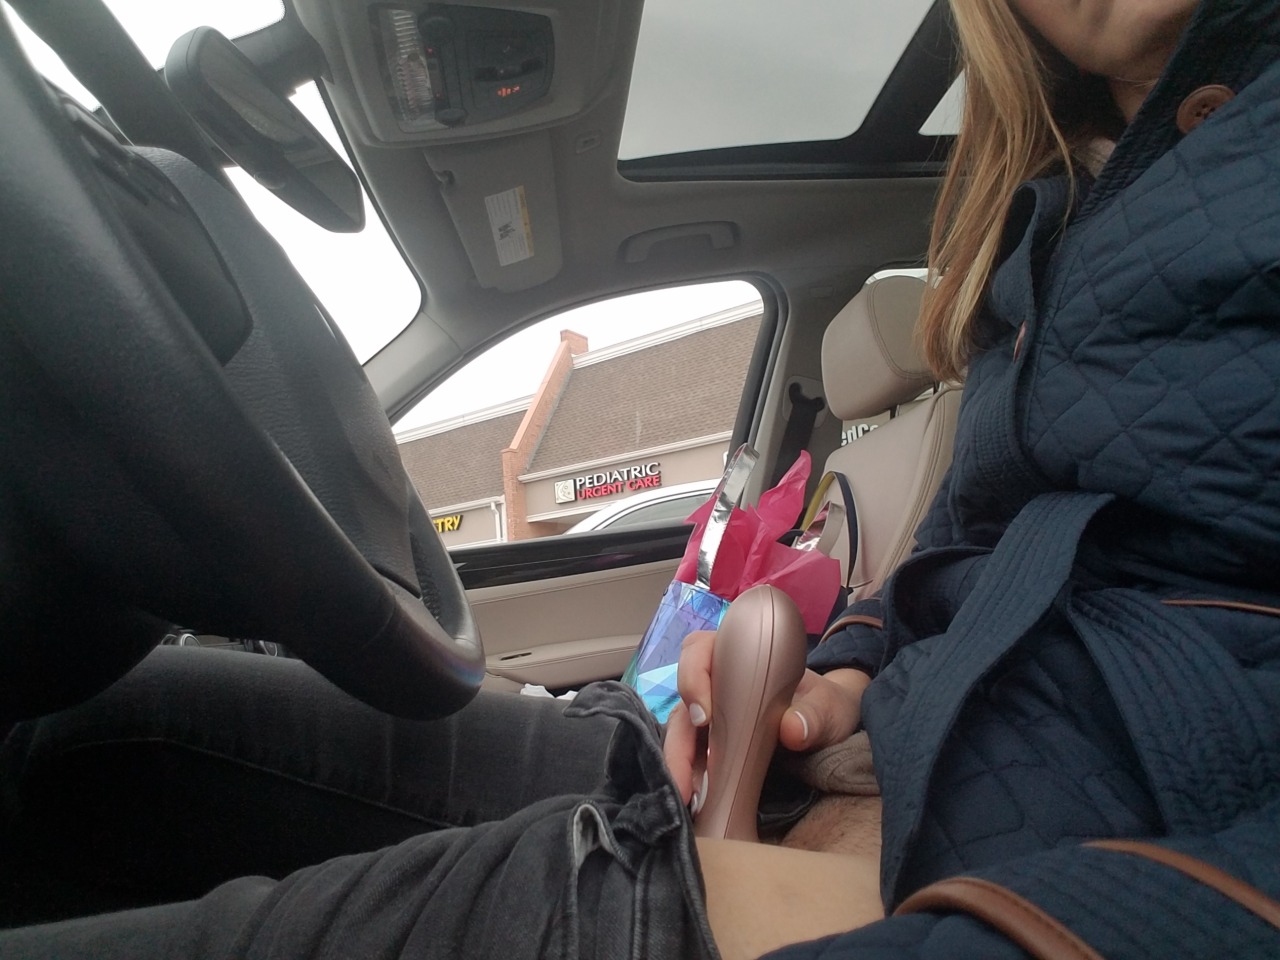 xoxox-shhh:  so, i took a break from shopping yesterday to cum in a public parking